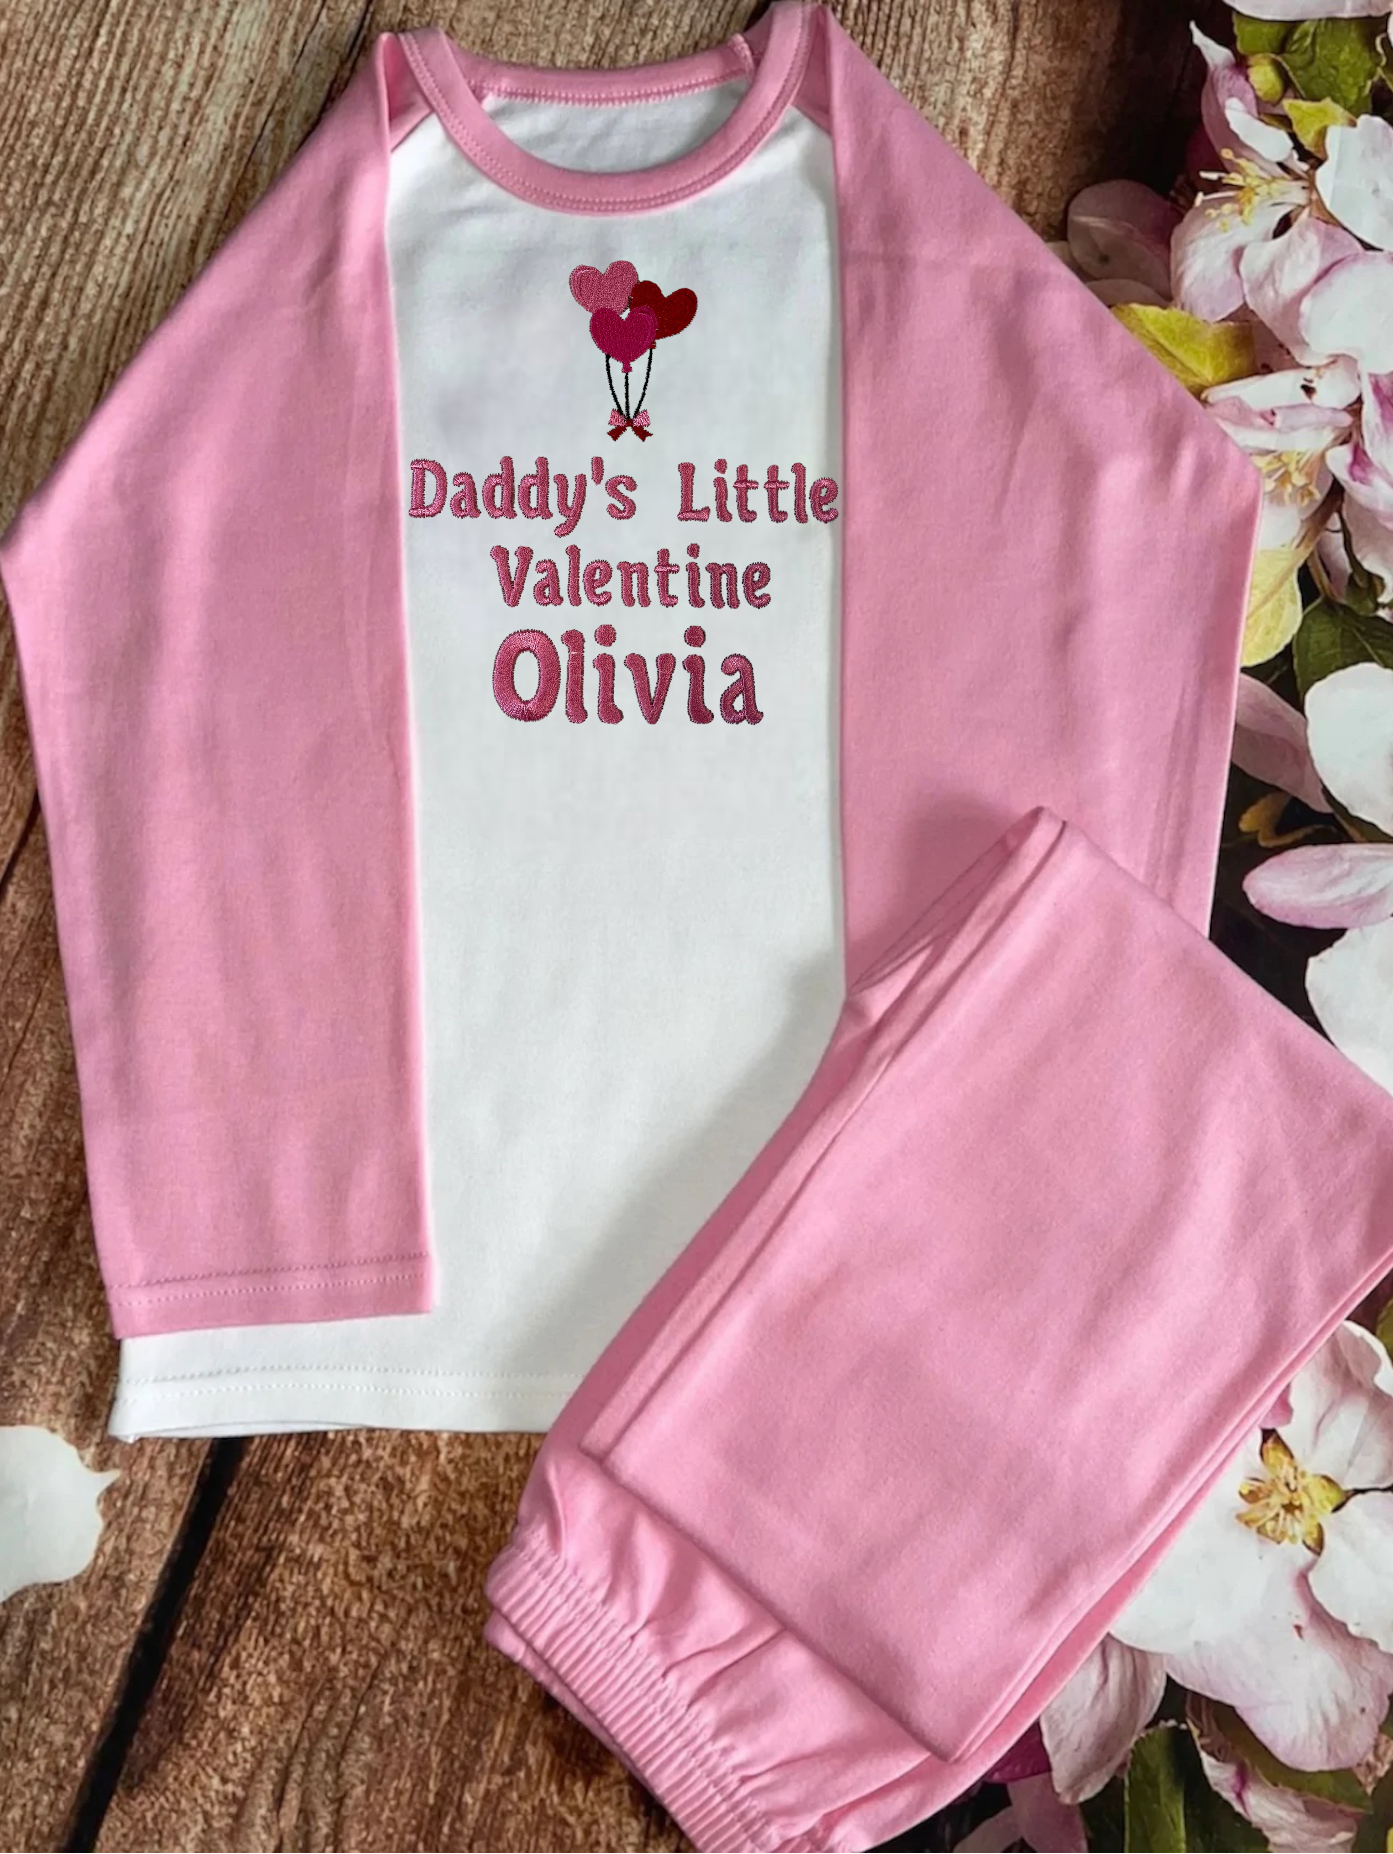 'Mummy's / Daddy's little valentine' pyjamas & sleep suits , embroidered & personalised with name. Matching, Gift, keepsake, high quality, soft, PJ's